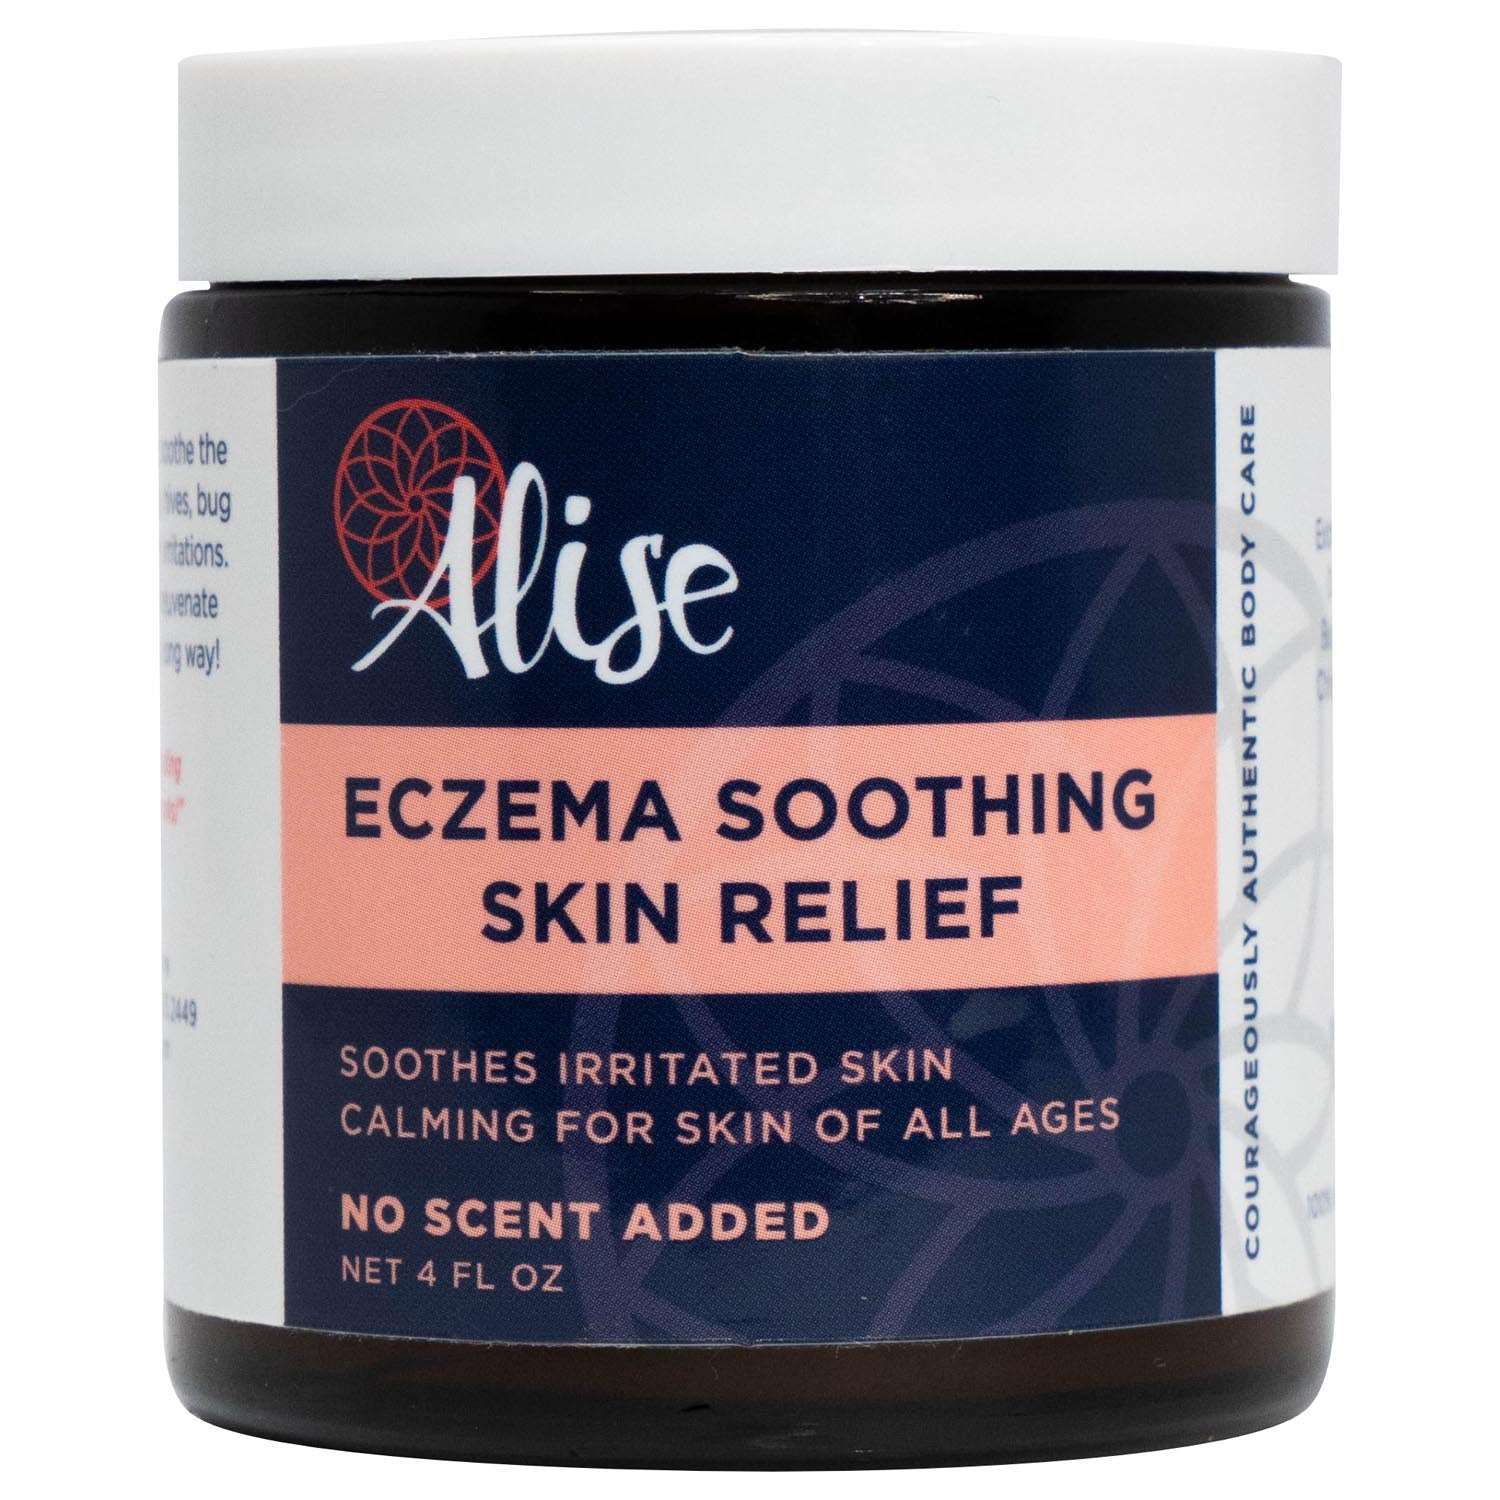 Eczema Soothing Skin Relief Salve 4oz Jar handcrafted by Alise Body Care